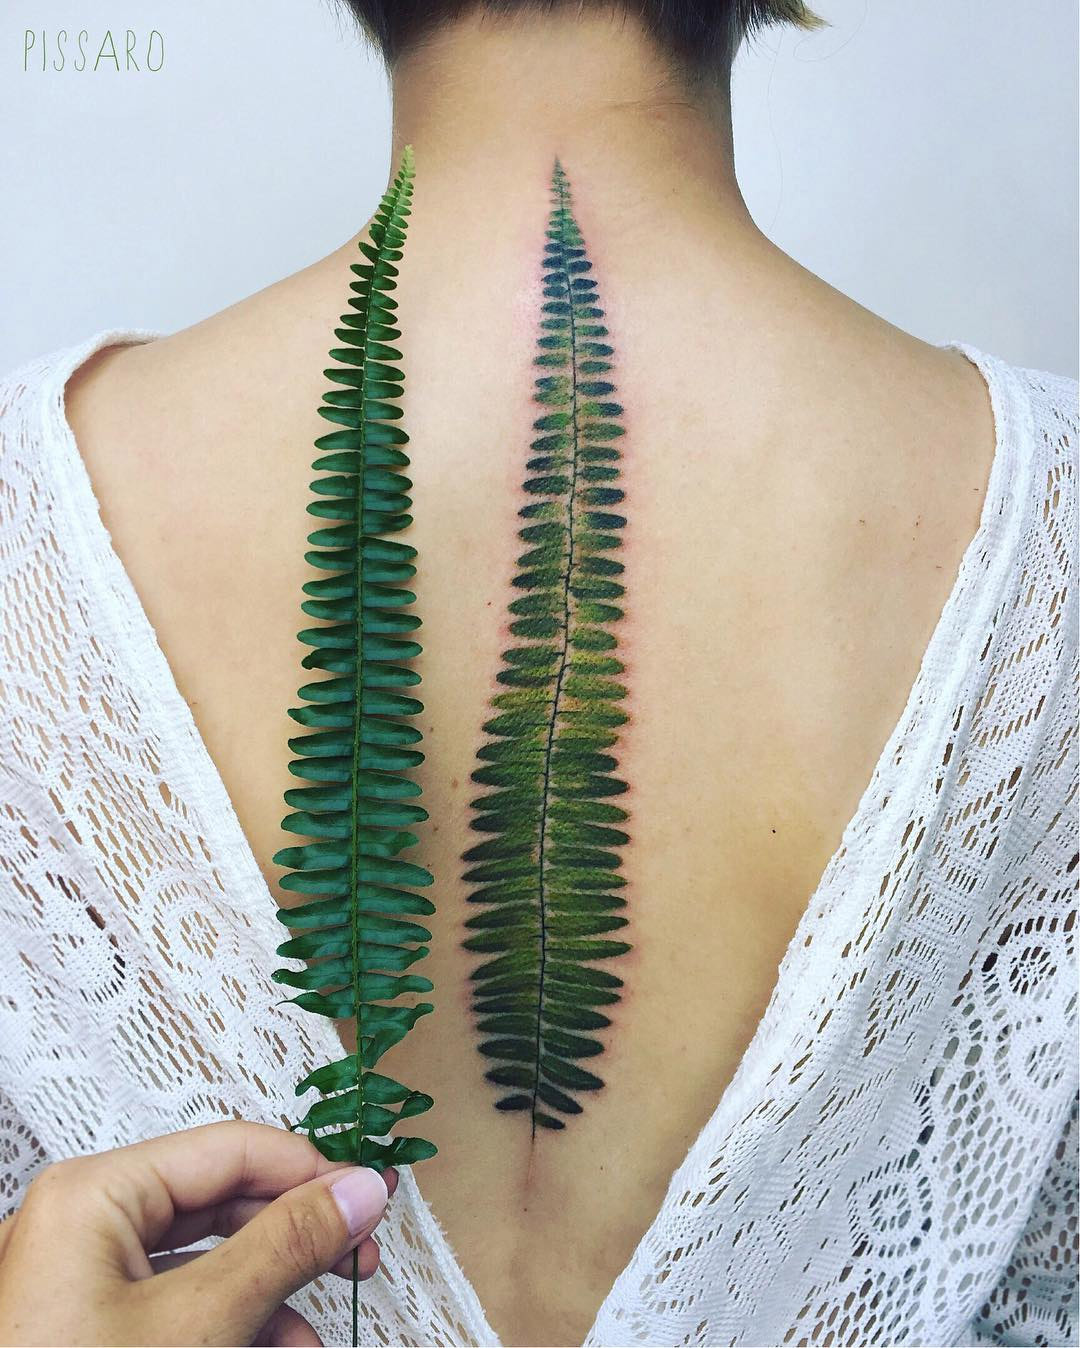 darkinternalthoughts:  itscolossal:Delicate Botanical Tattoos by Pis Saro 😍😍😍